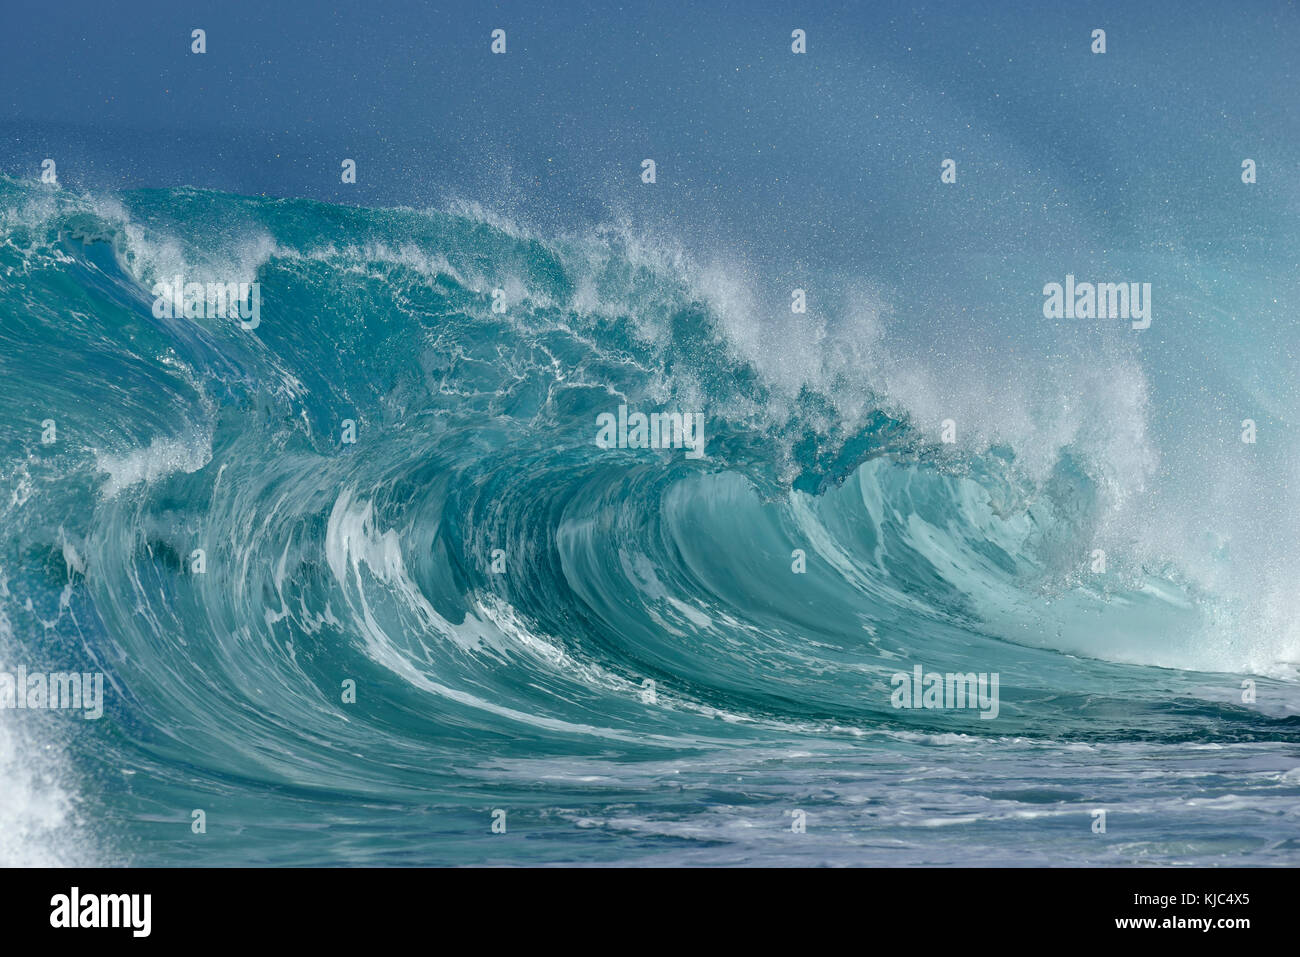 Big dramatic wave in the Pacific Ocean at Oahu, Hawaii, USA Stock Photo